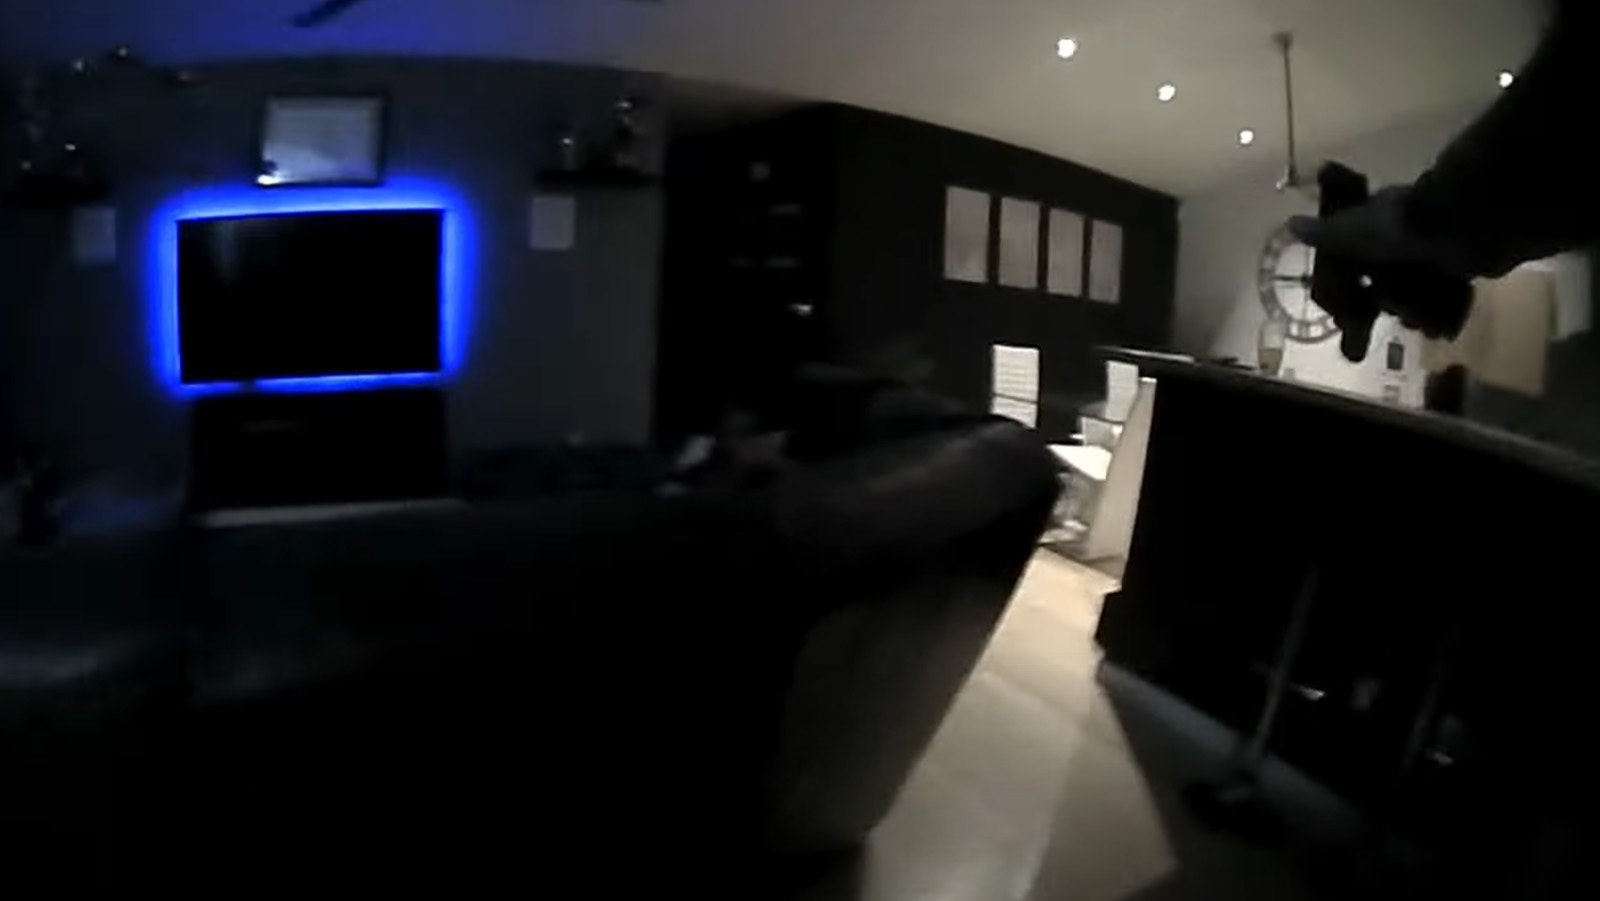 Body cam video released by the Laramie County Sheriff's Office shows an officer with weapon draw, upper right, entering a house after a suspect.